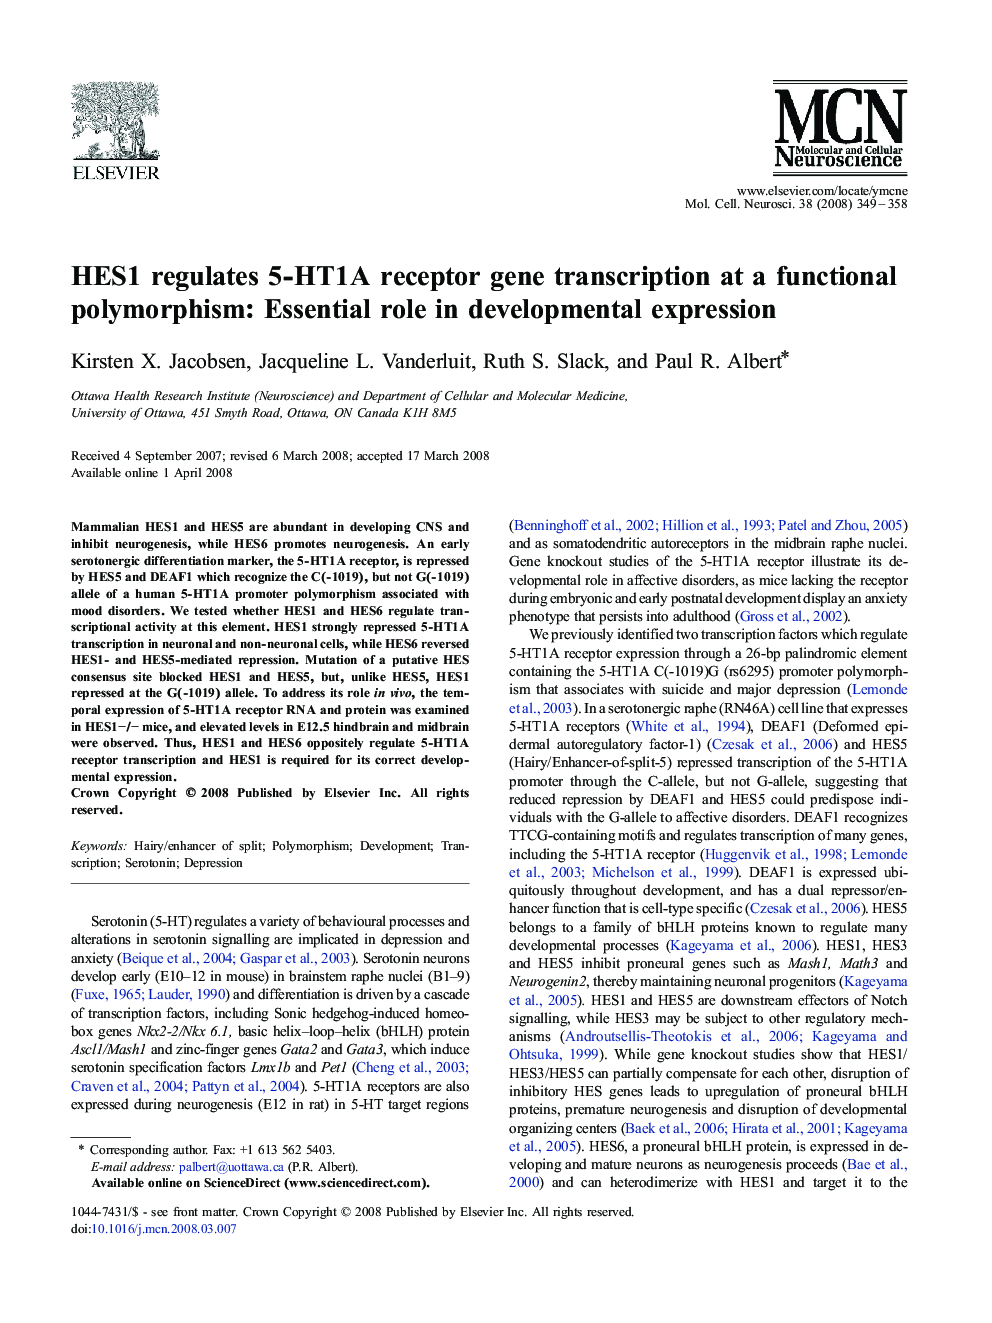 HES1 regulates 5-HT1A receptor gene transcription at a functional polymorphism: Essential role in developmental expression